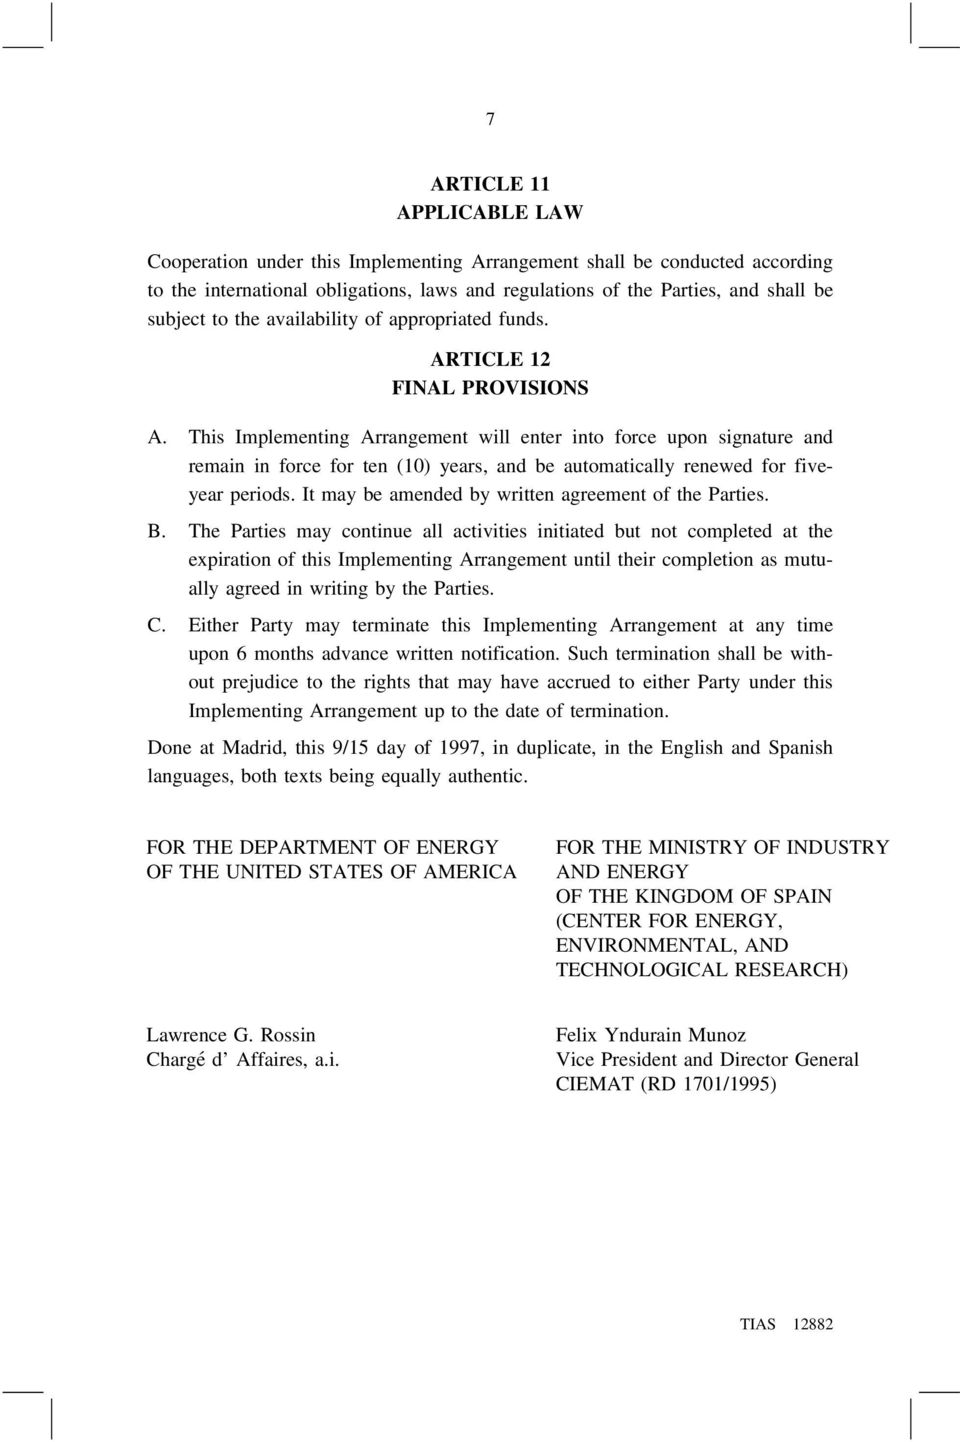 This Implementing Arrangement will enter into force upon signature and remain in force for ten (10) years, and be automatically renewed for fiveyear periods.